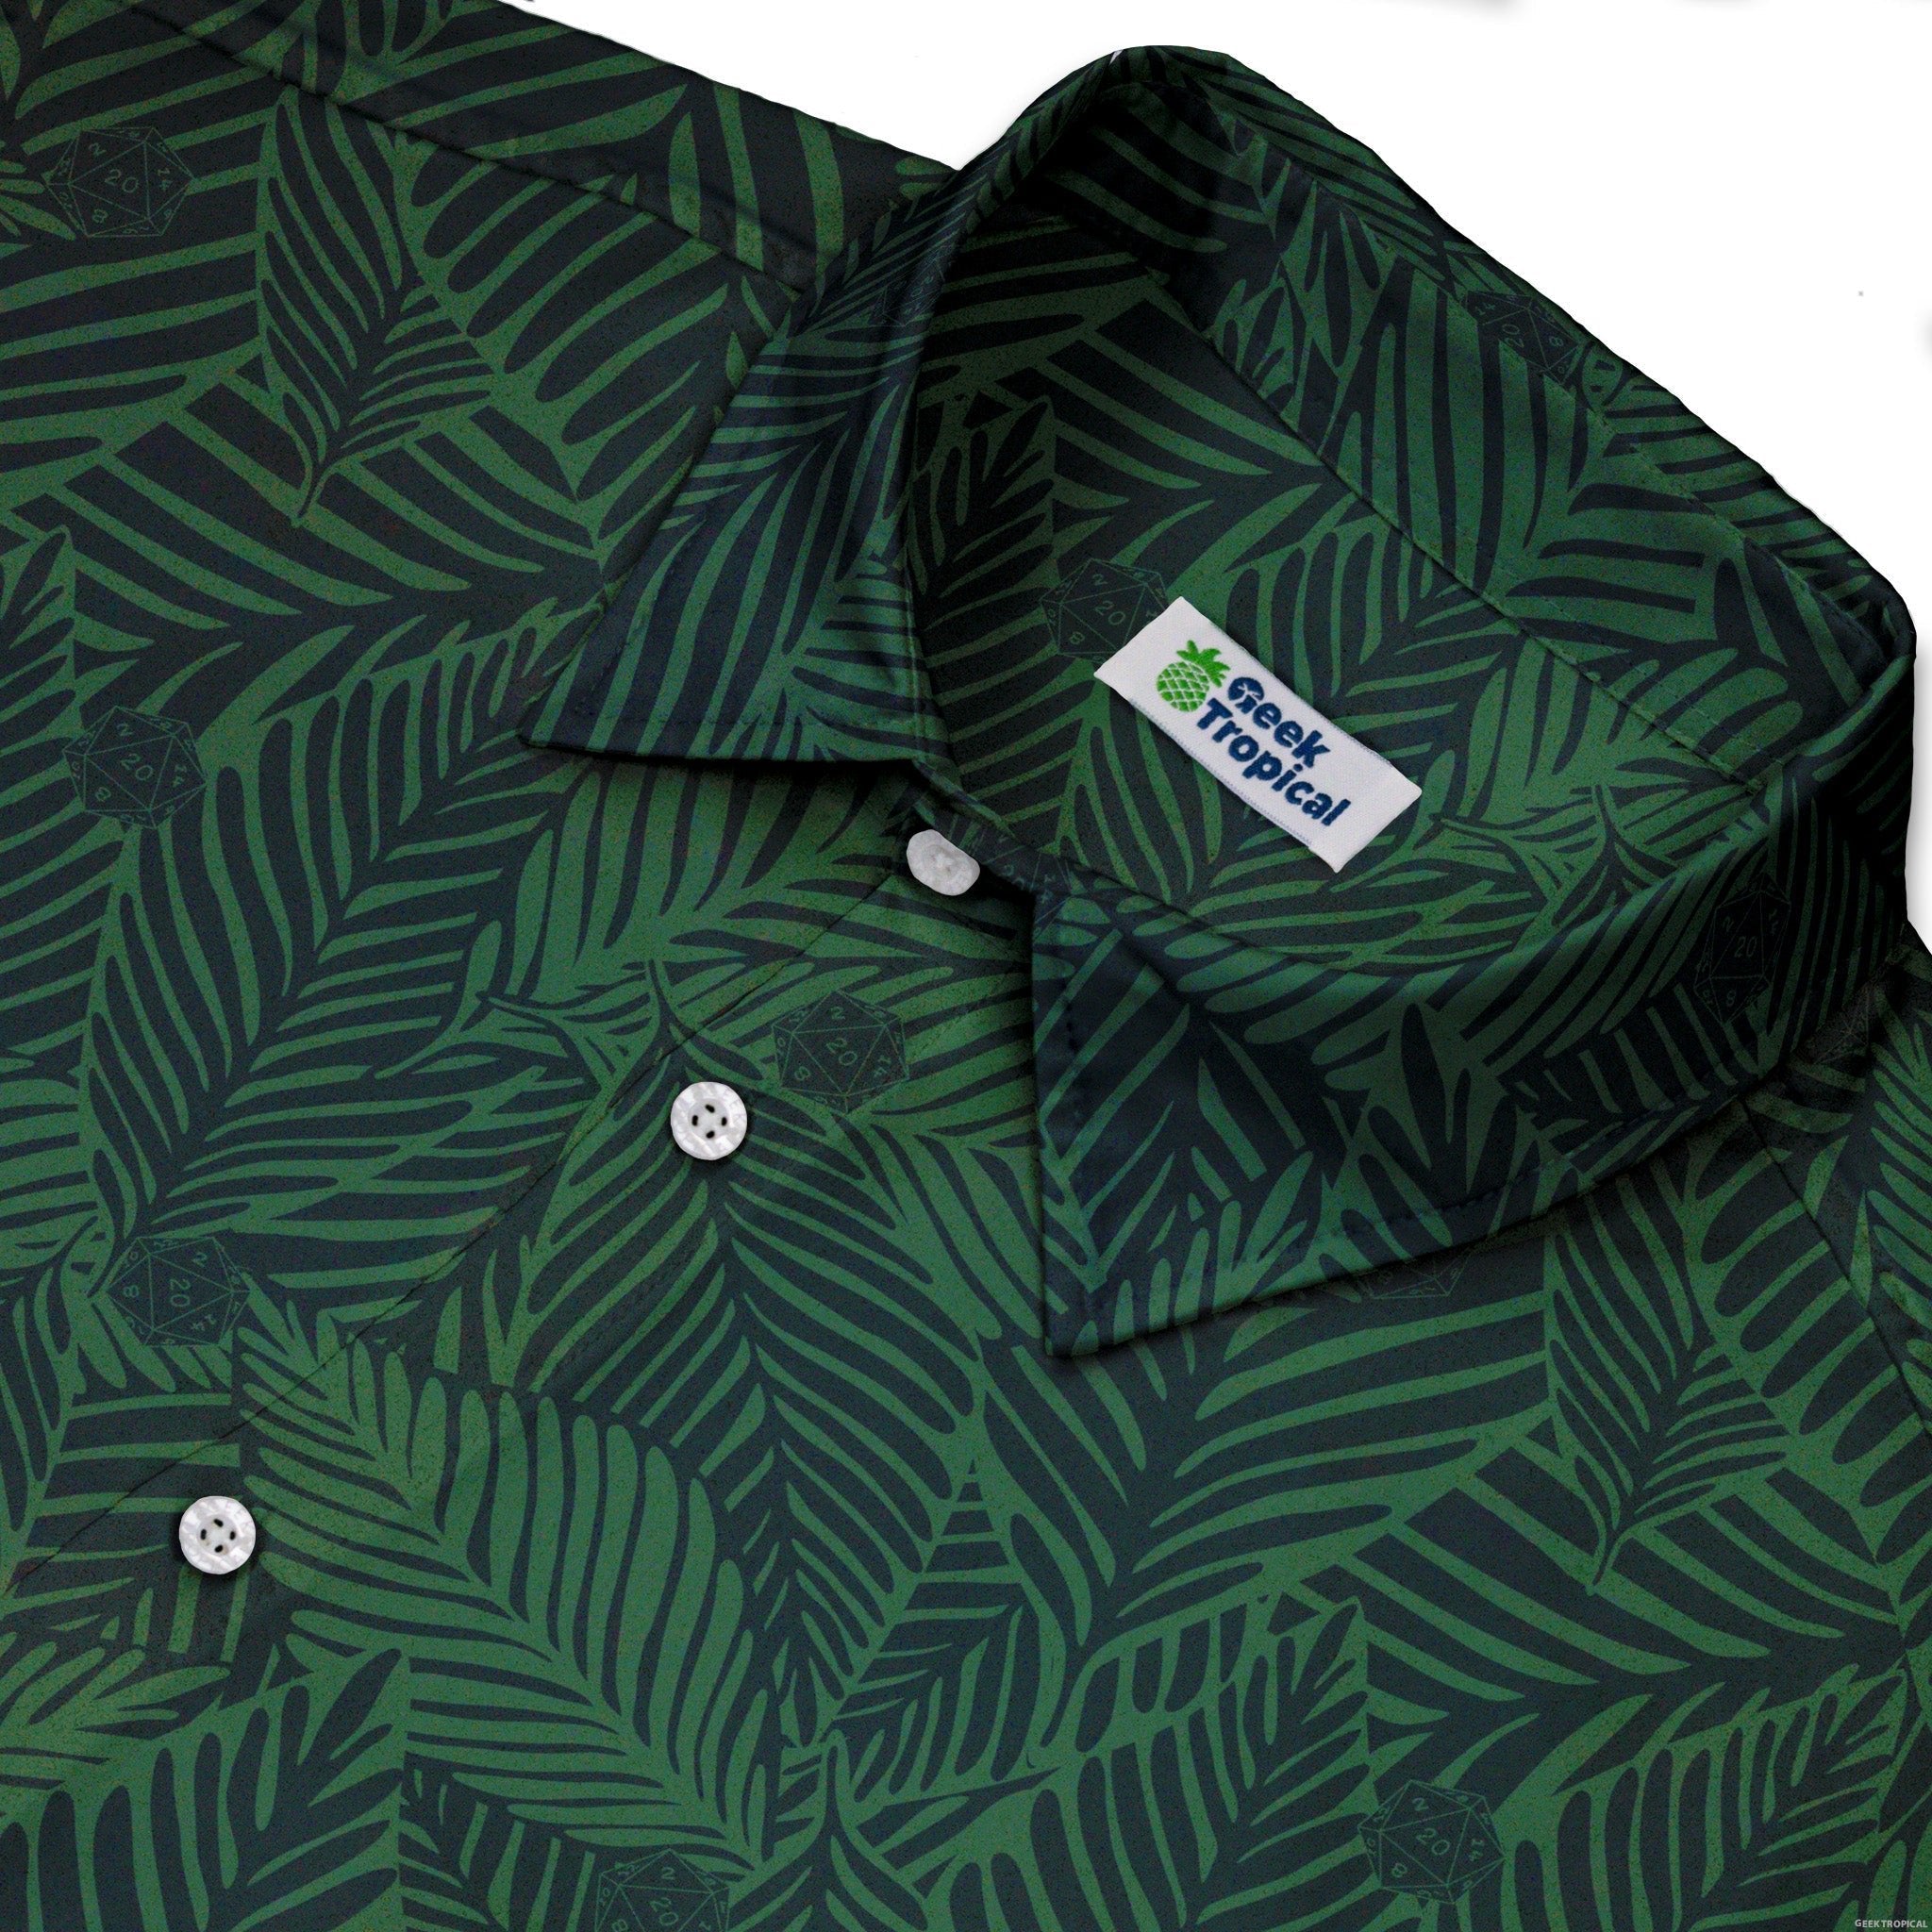 Tropical Dnd Dice Button Up Shirt - adult sizing - Design by Dunking Toast - dnd & rpg print